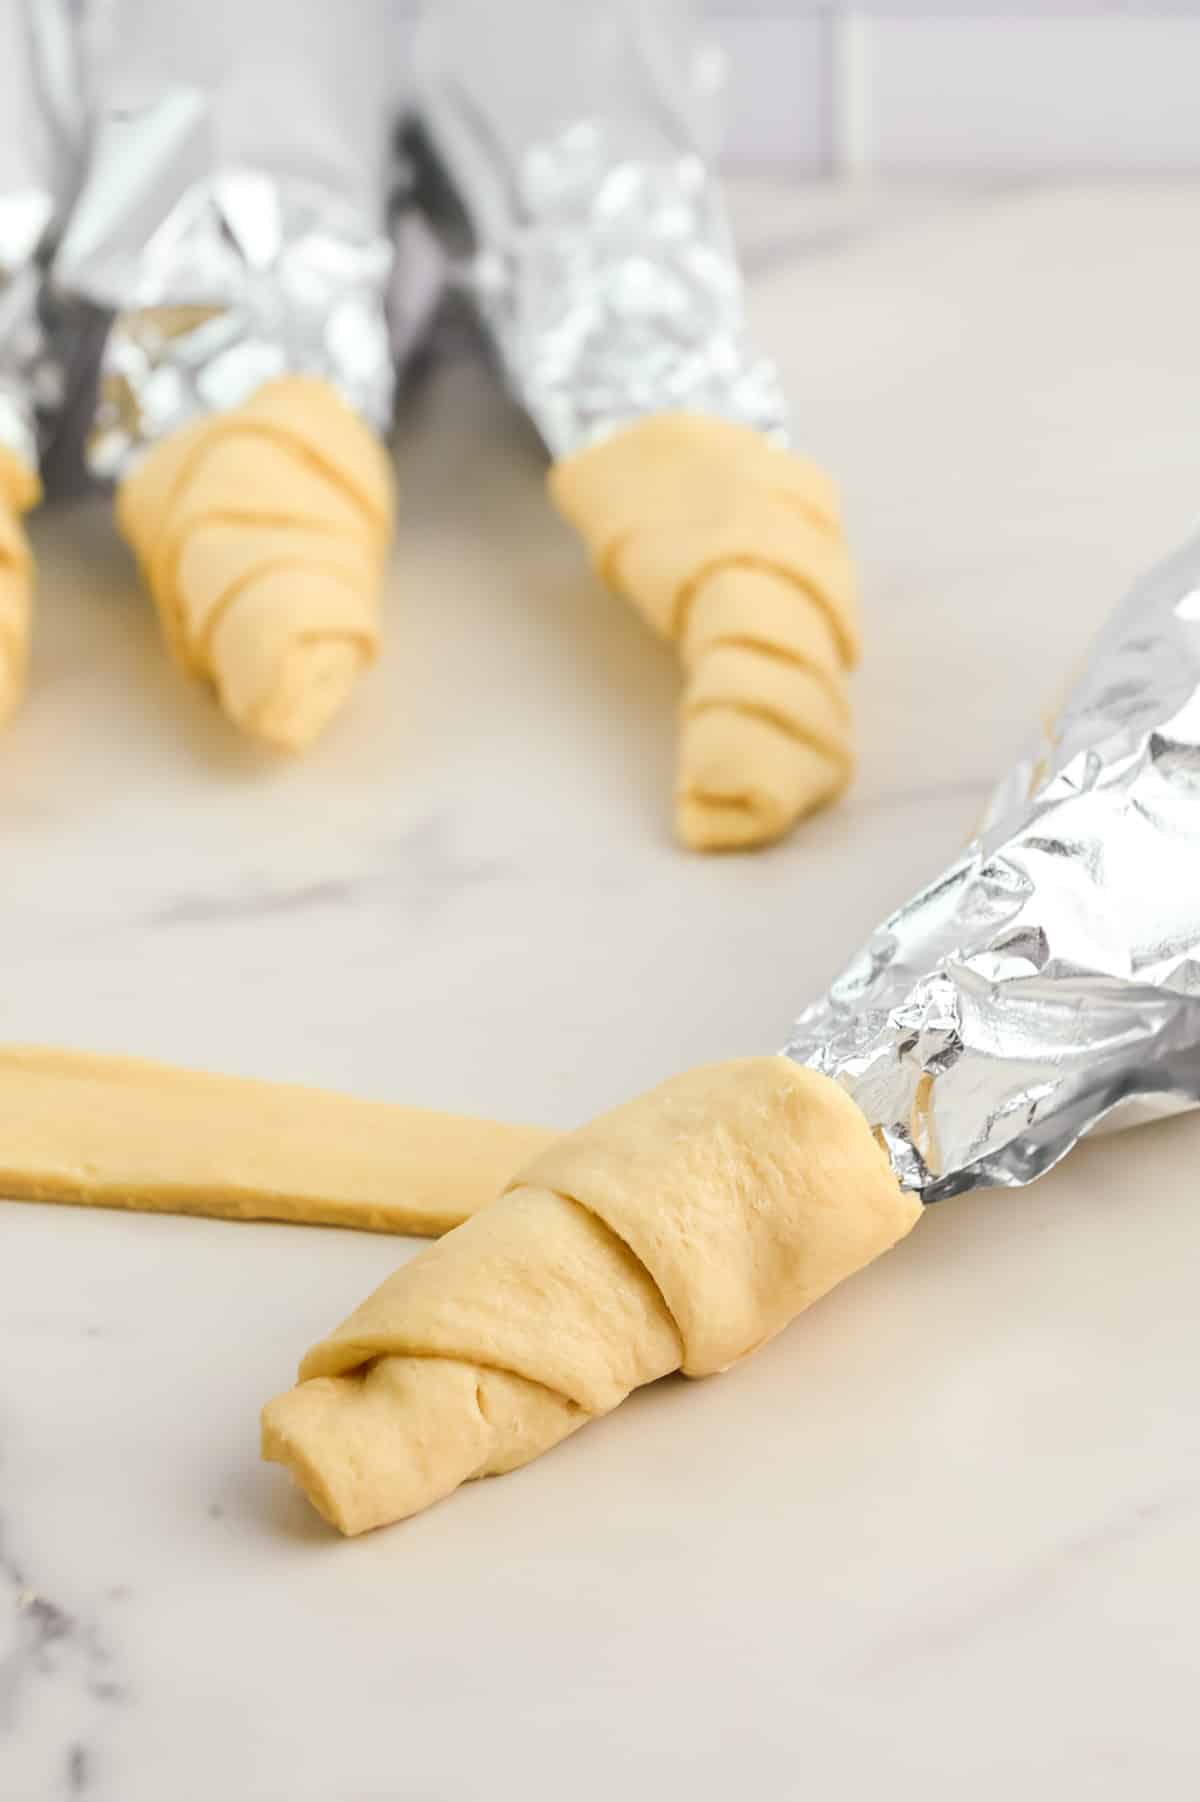 Crescent roll dough being wrapped around a piece of foil on a counter.